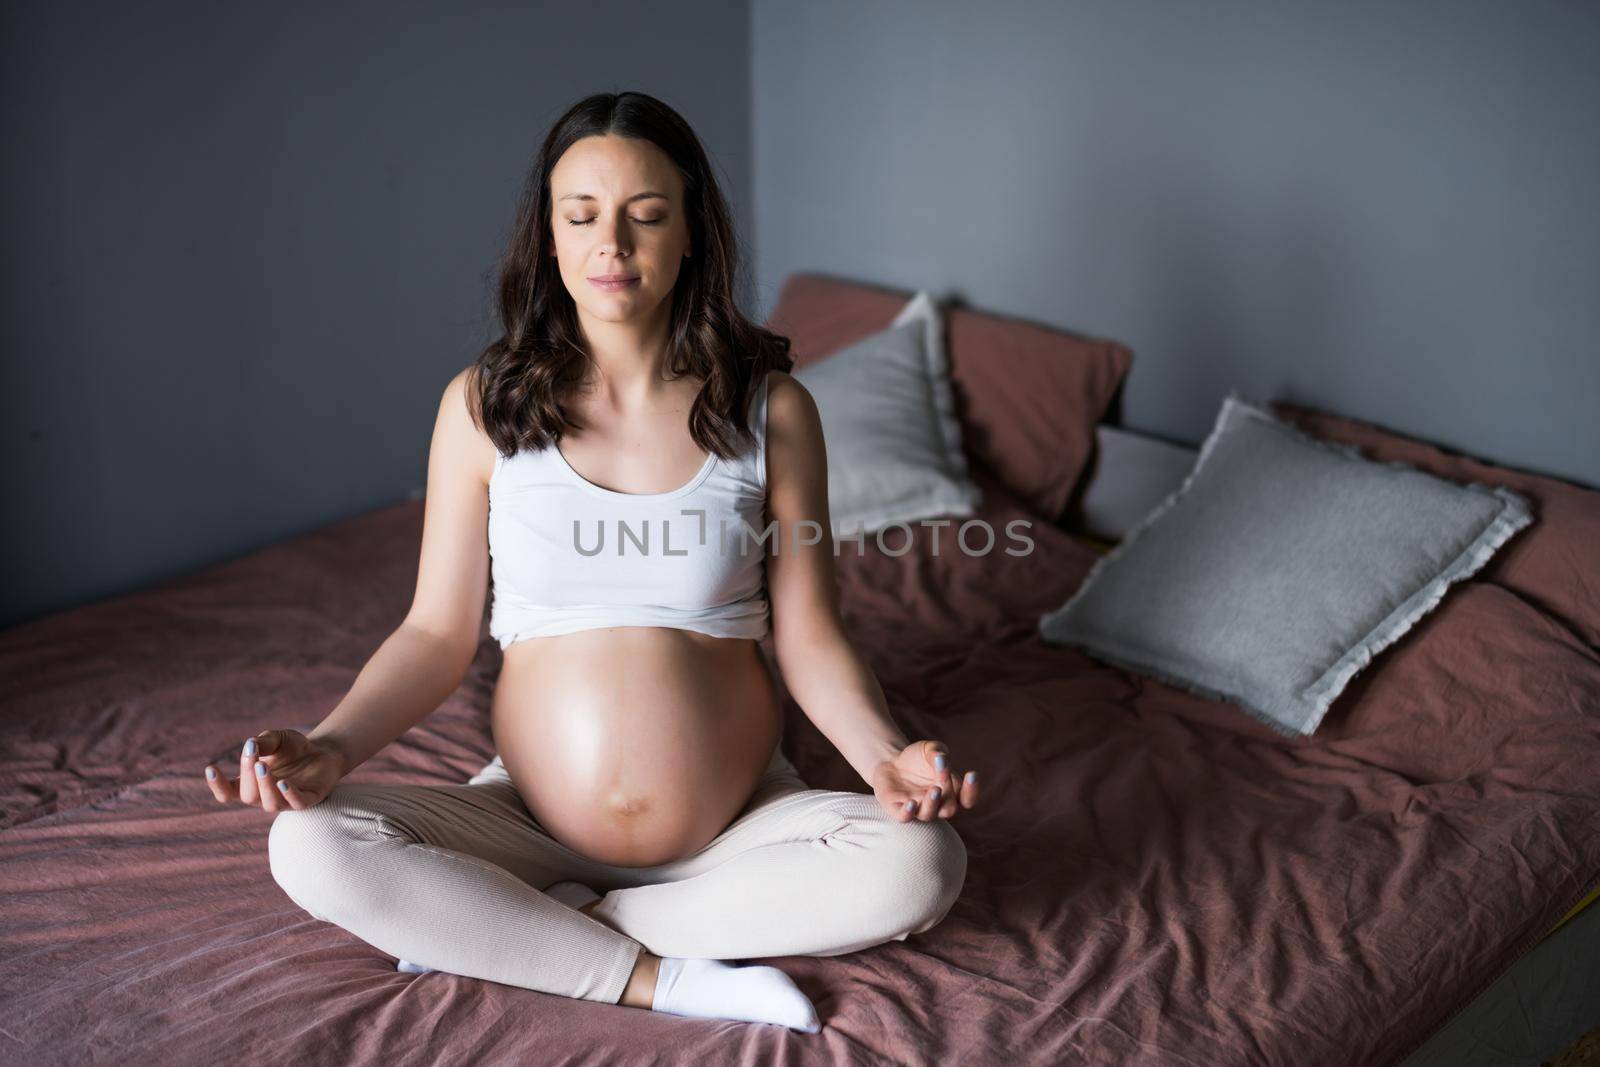 Pregnant woman relaxing at home. She is sitting on bed and meditating.